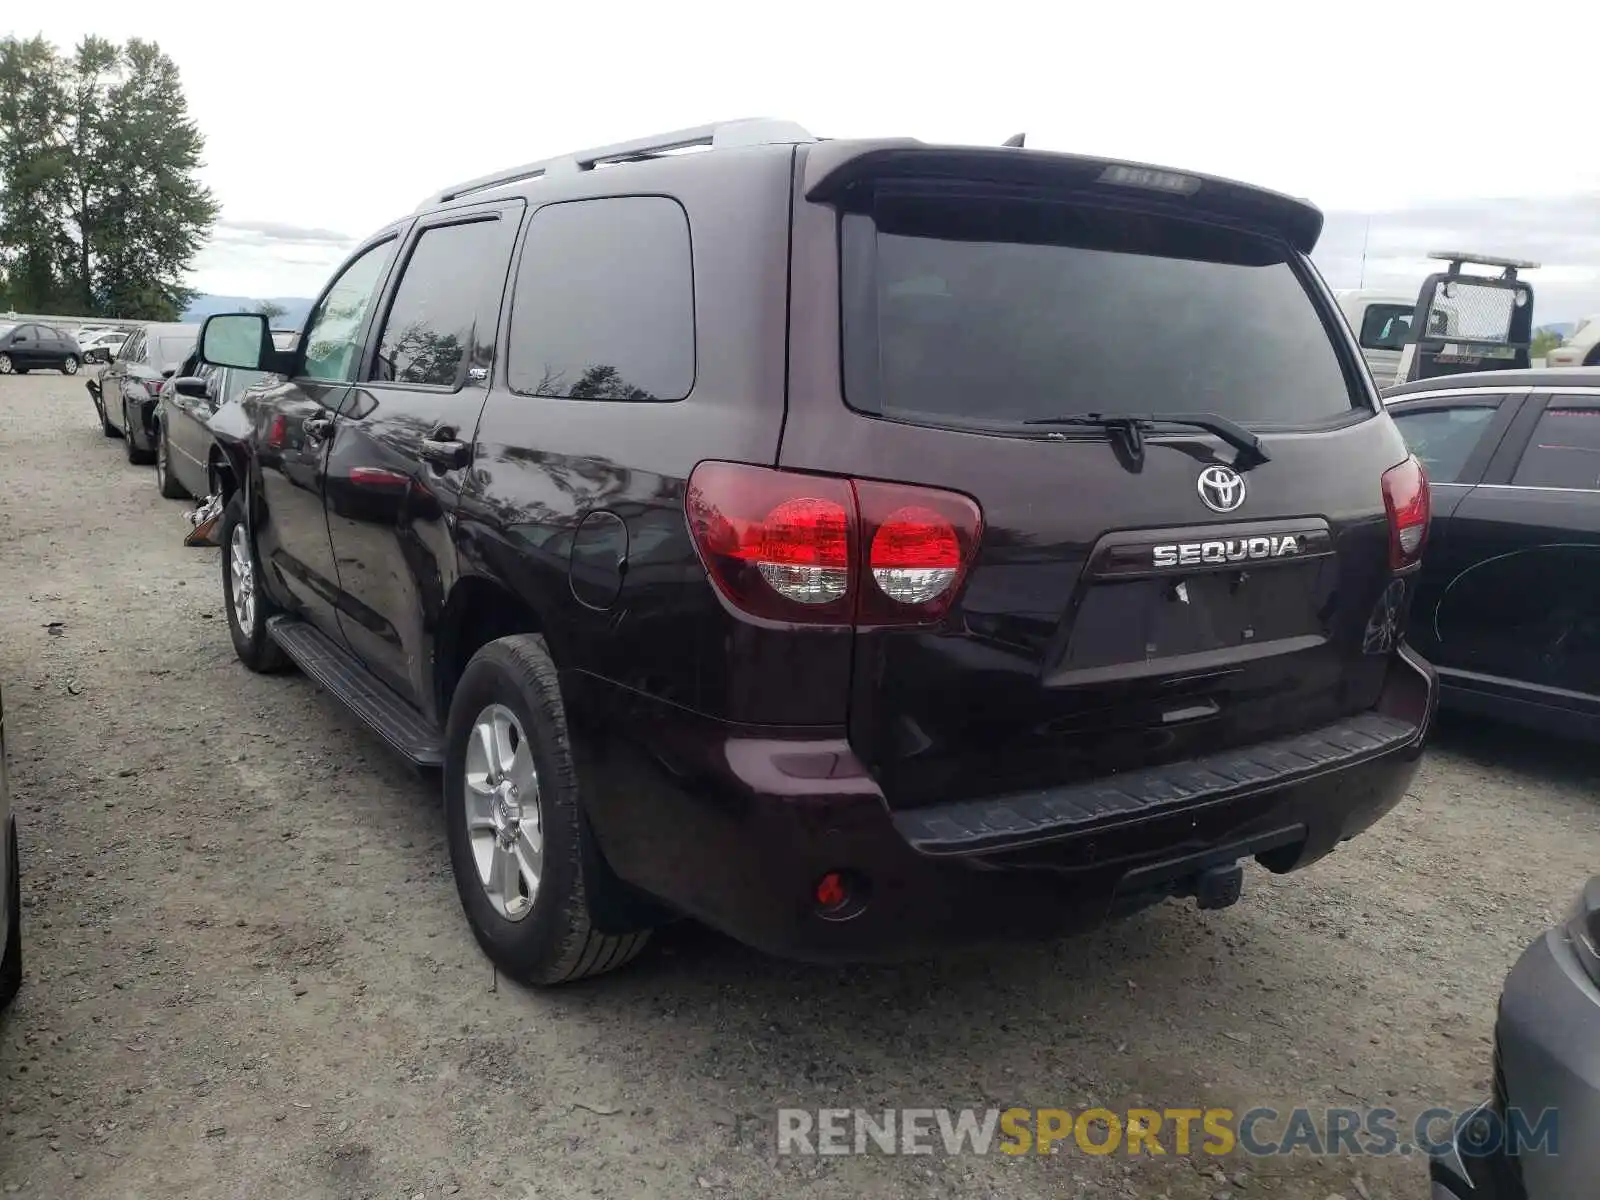 3 Photograph of a damaged car 5TDBY5G10KS173126 TOYOTA SEQUOIA 2019